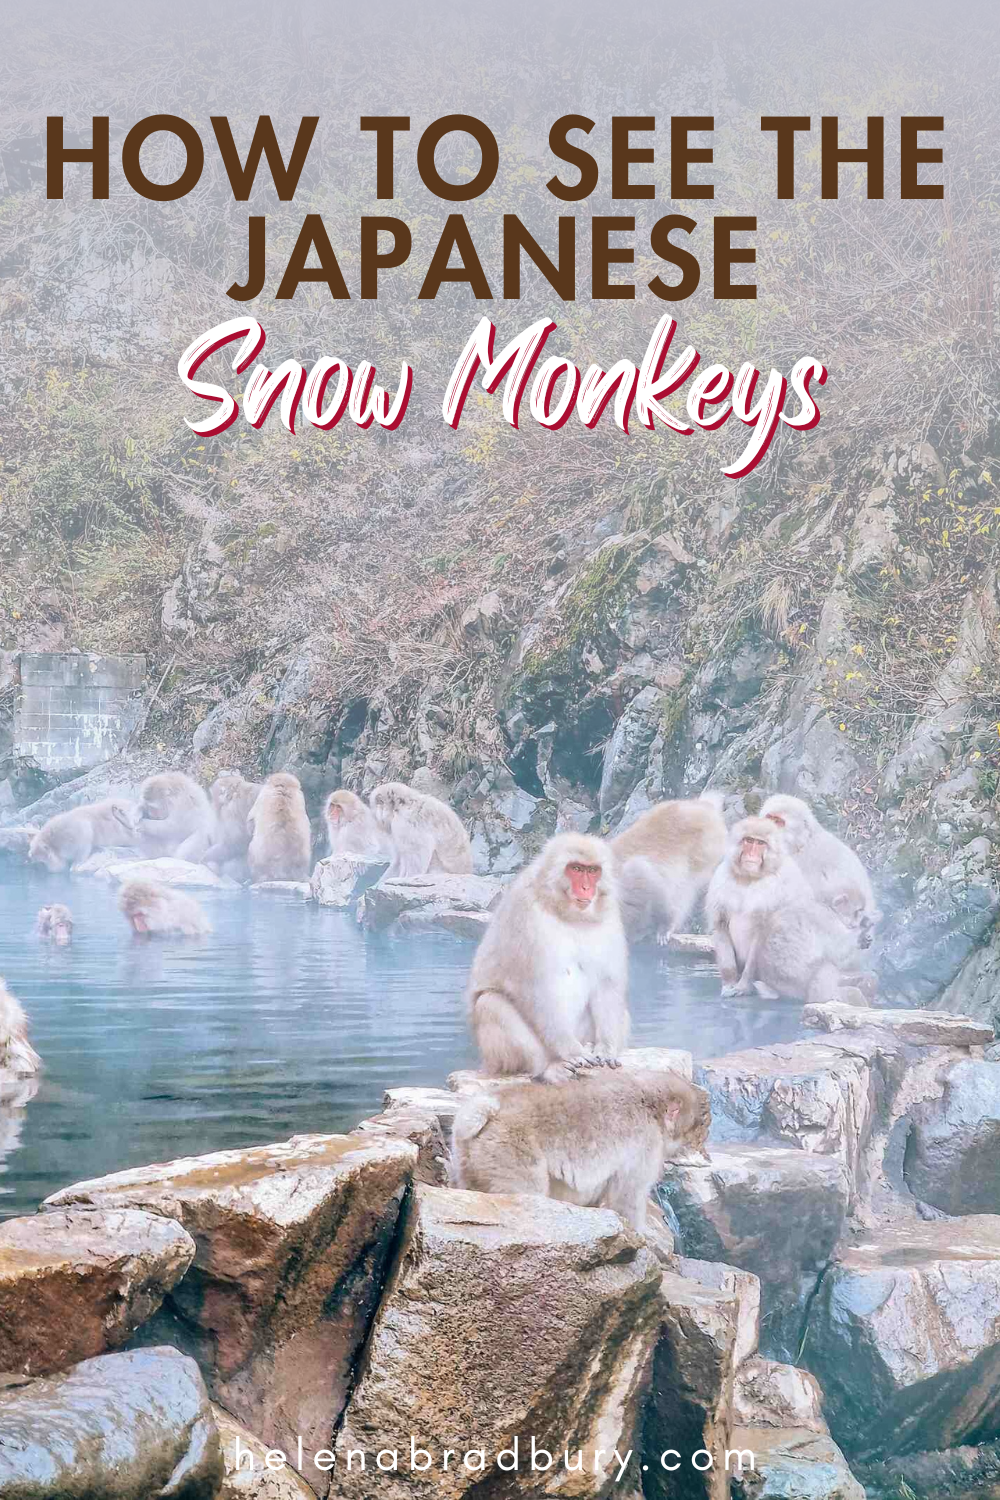 If seeing the Japanese snow monkeys is on your bucket list, here’s everything you need to know about how to see them in spring, the best time to visit and how to get there. | snow monkeys japan | snow monkey park japan | snow monkeys japan march | sn